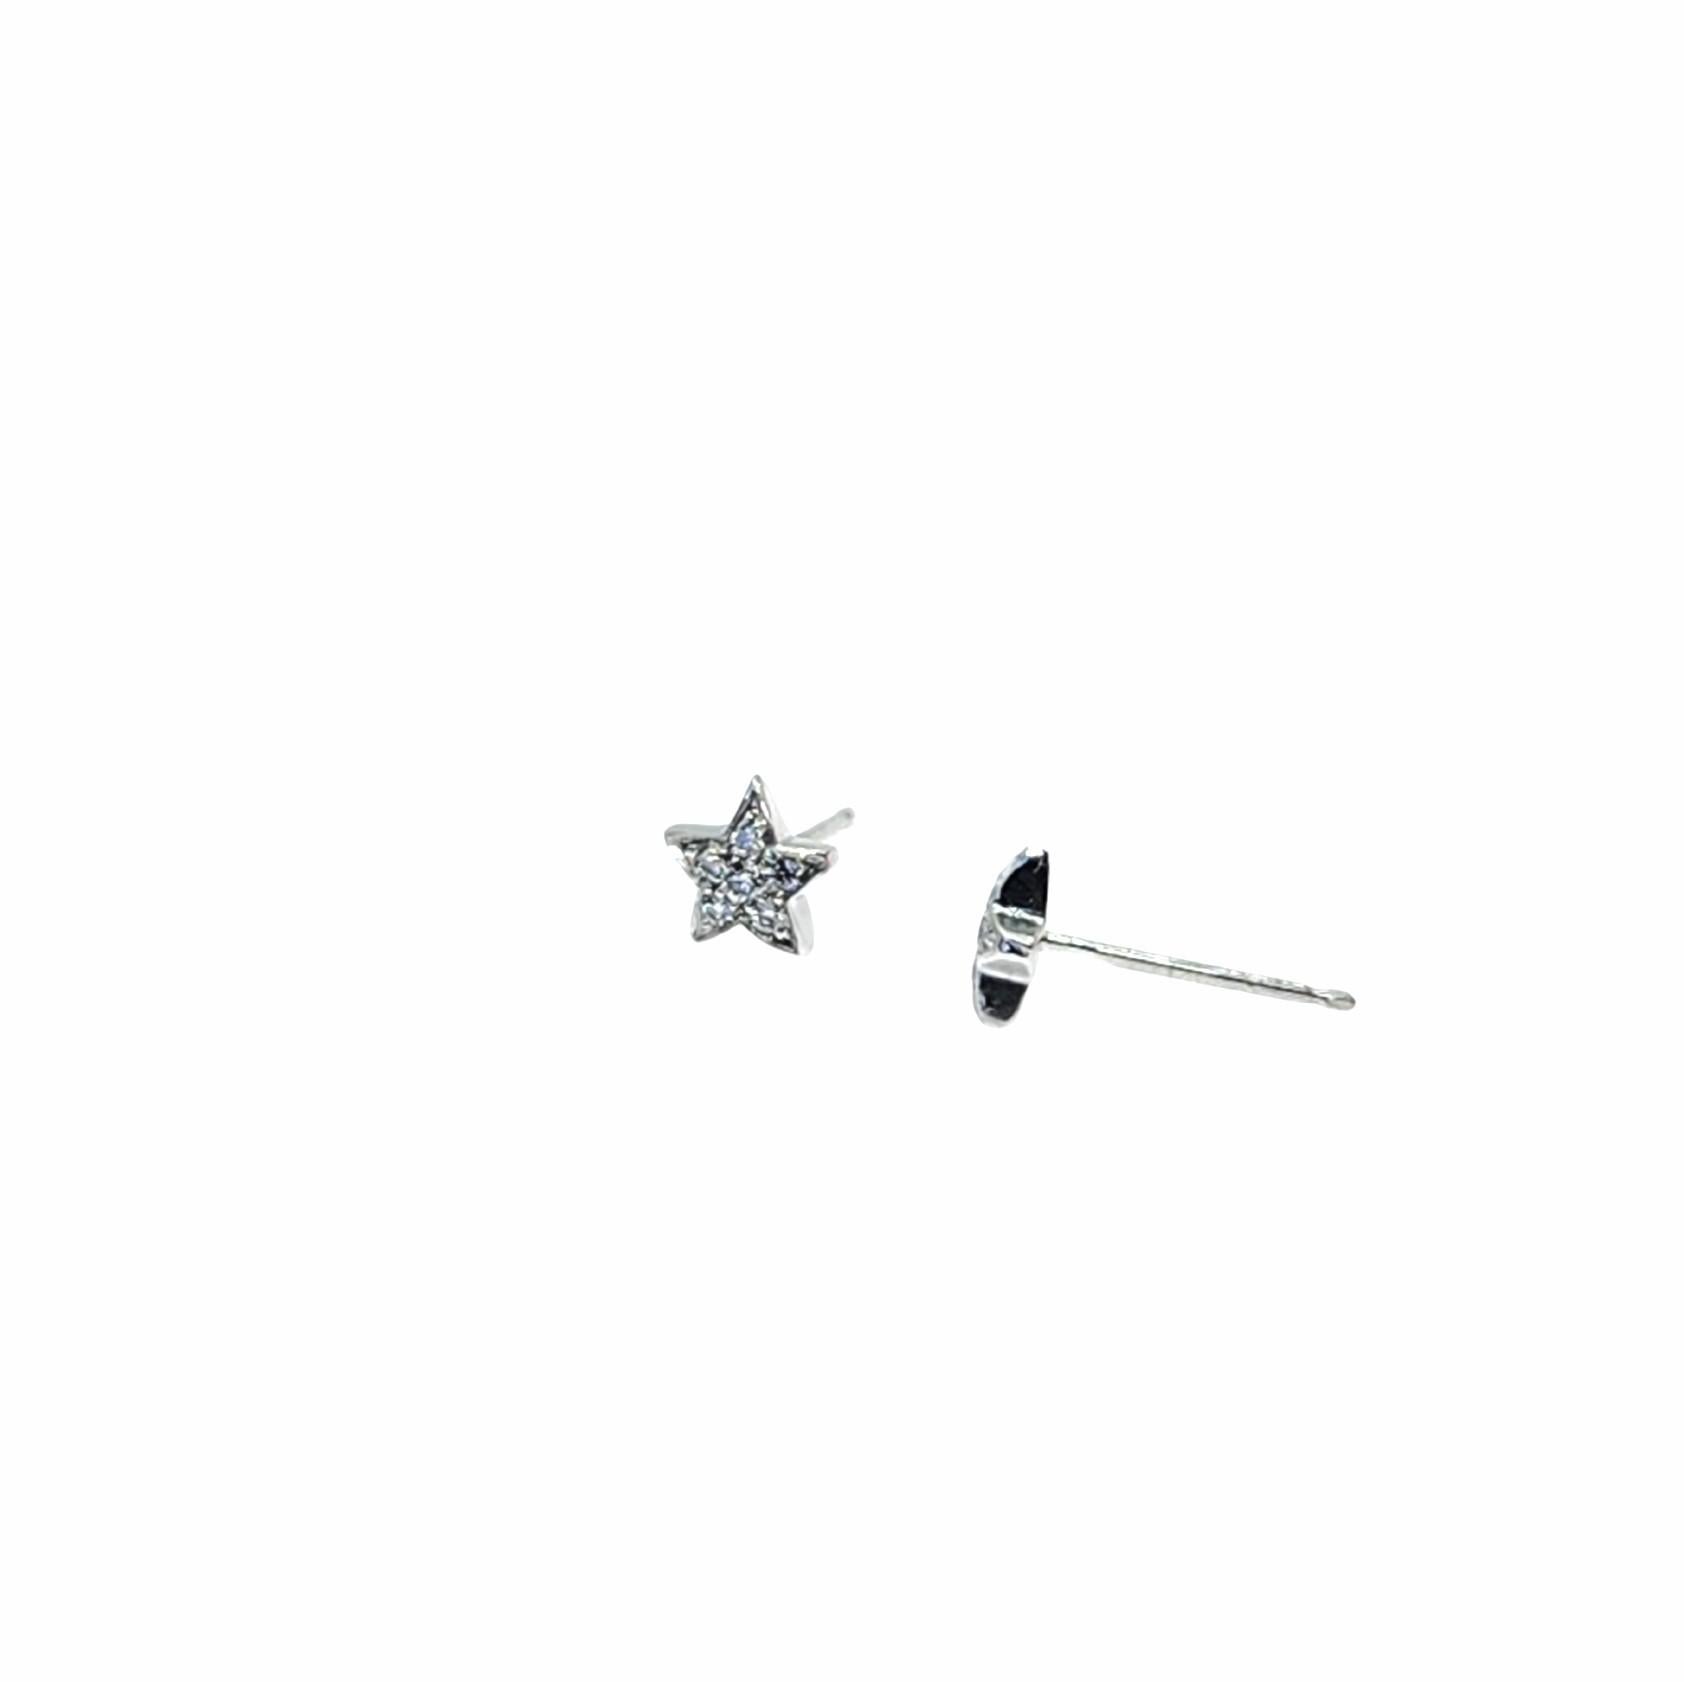 Cute puff star post earrings in high polished platinum and 12 diamonds for a total diamond weight of .075CT that create sparkle. Wear either solo or in multi piercings.
You will feel like a star in these earrings. 
Usually star designs are flat but